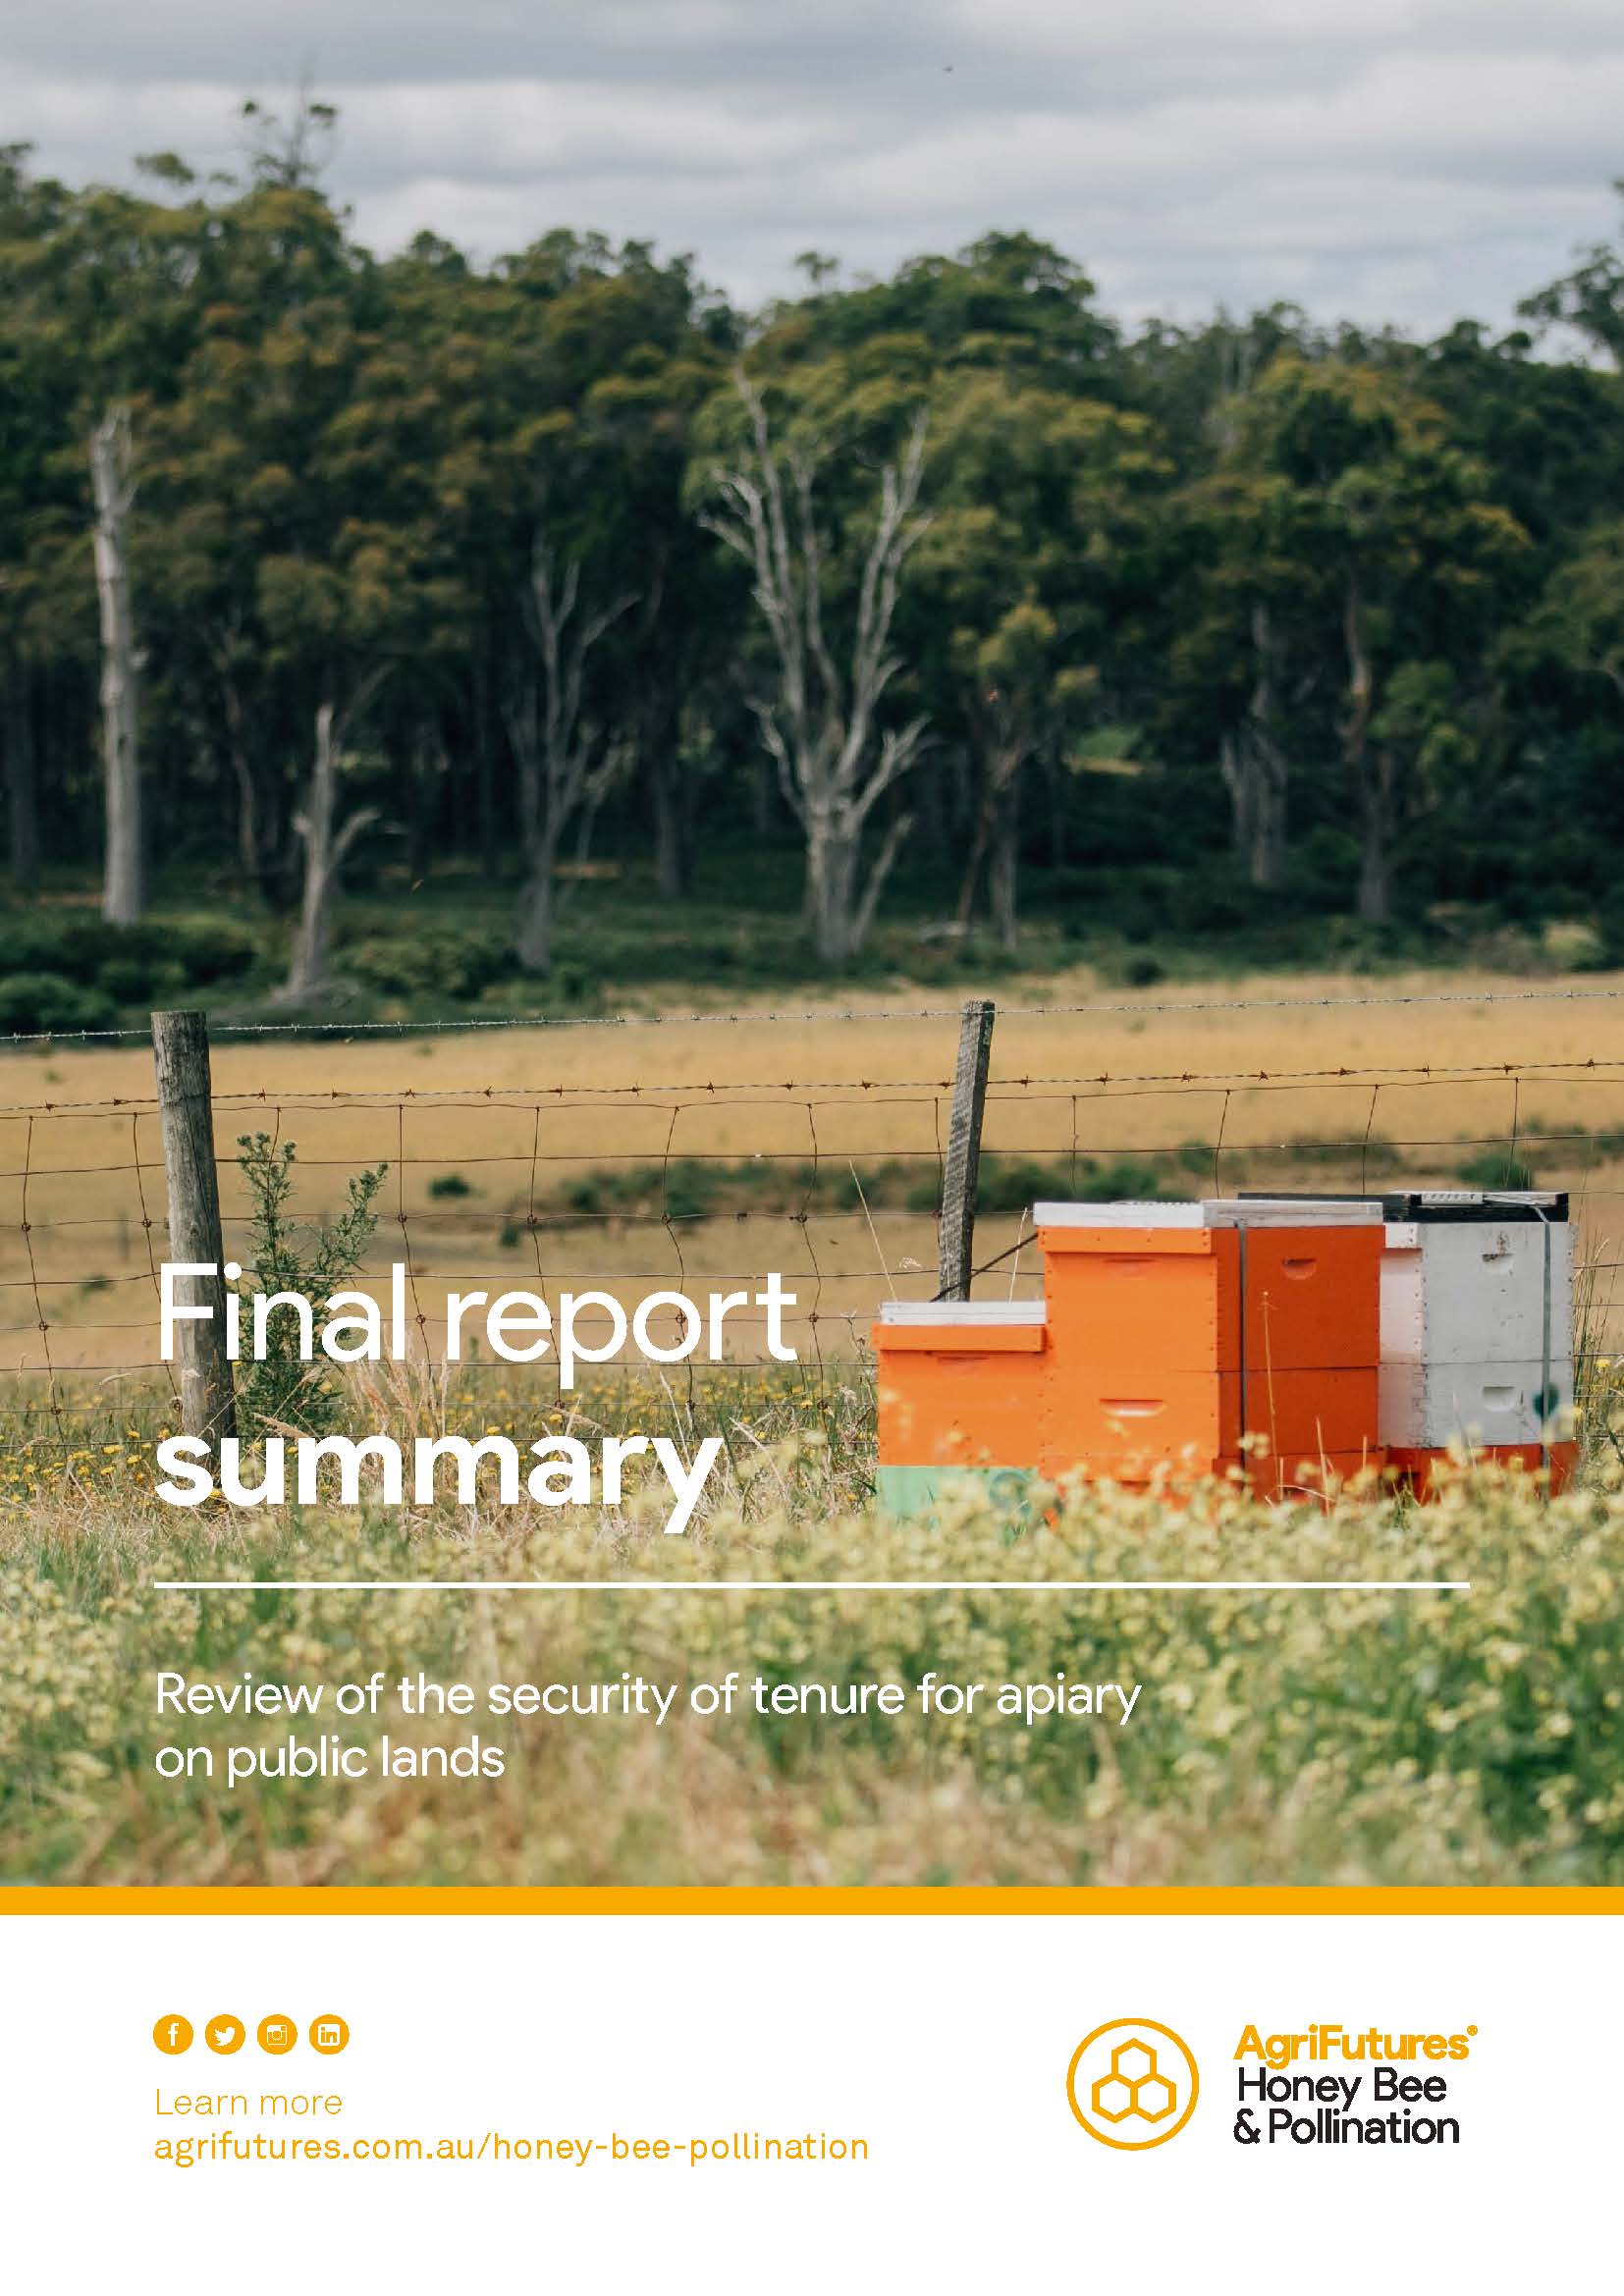 Final report summary: Review of the security of tenure for apiary on public lands - image